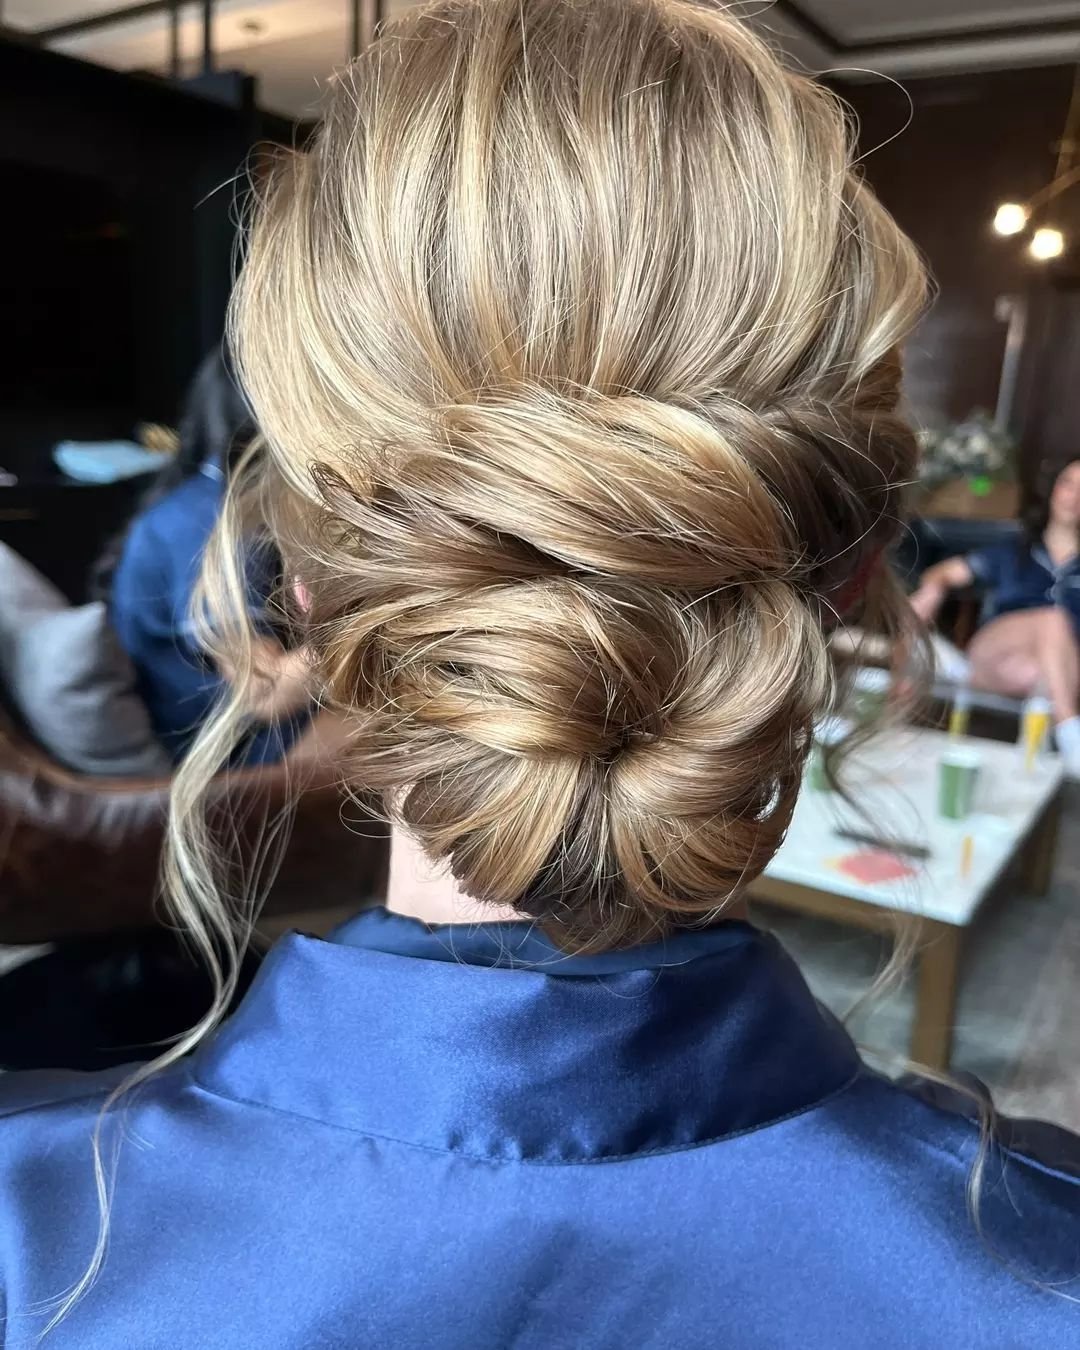 Twirl into the weekend with a fabulous twisted knot updo 💁&zwj;♀️ &nbsp;Who else loves this elegant look?✨
.
.
.
#weekendvibes #twistedknot #tetxuredupdo #updo #themakeuploft #detroitweddings #travelbeautyteam #updoobsessed #eventhair #bridalhair